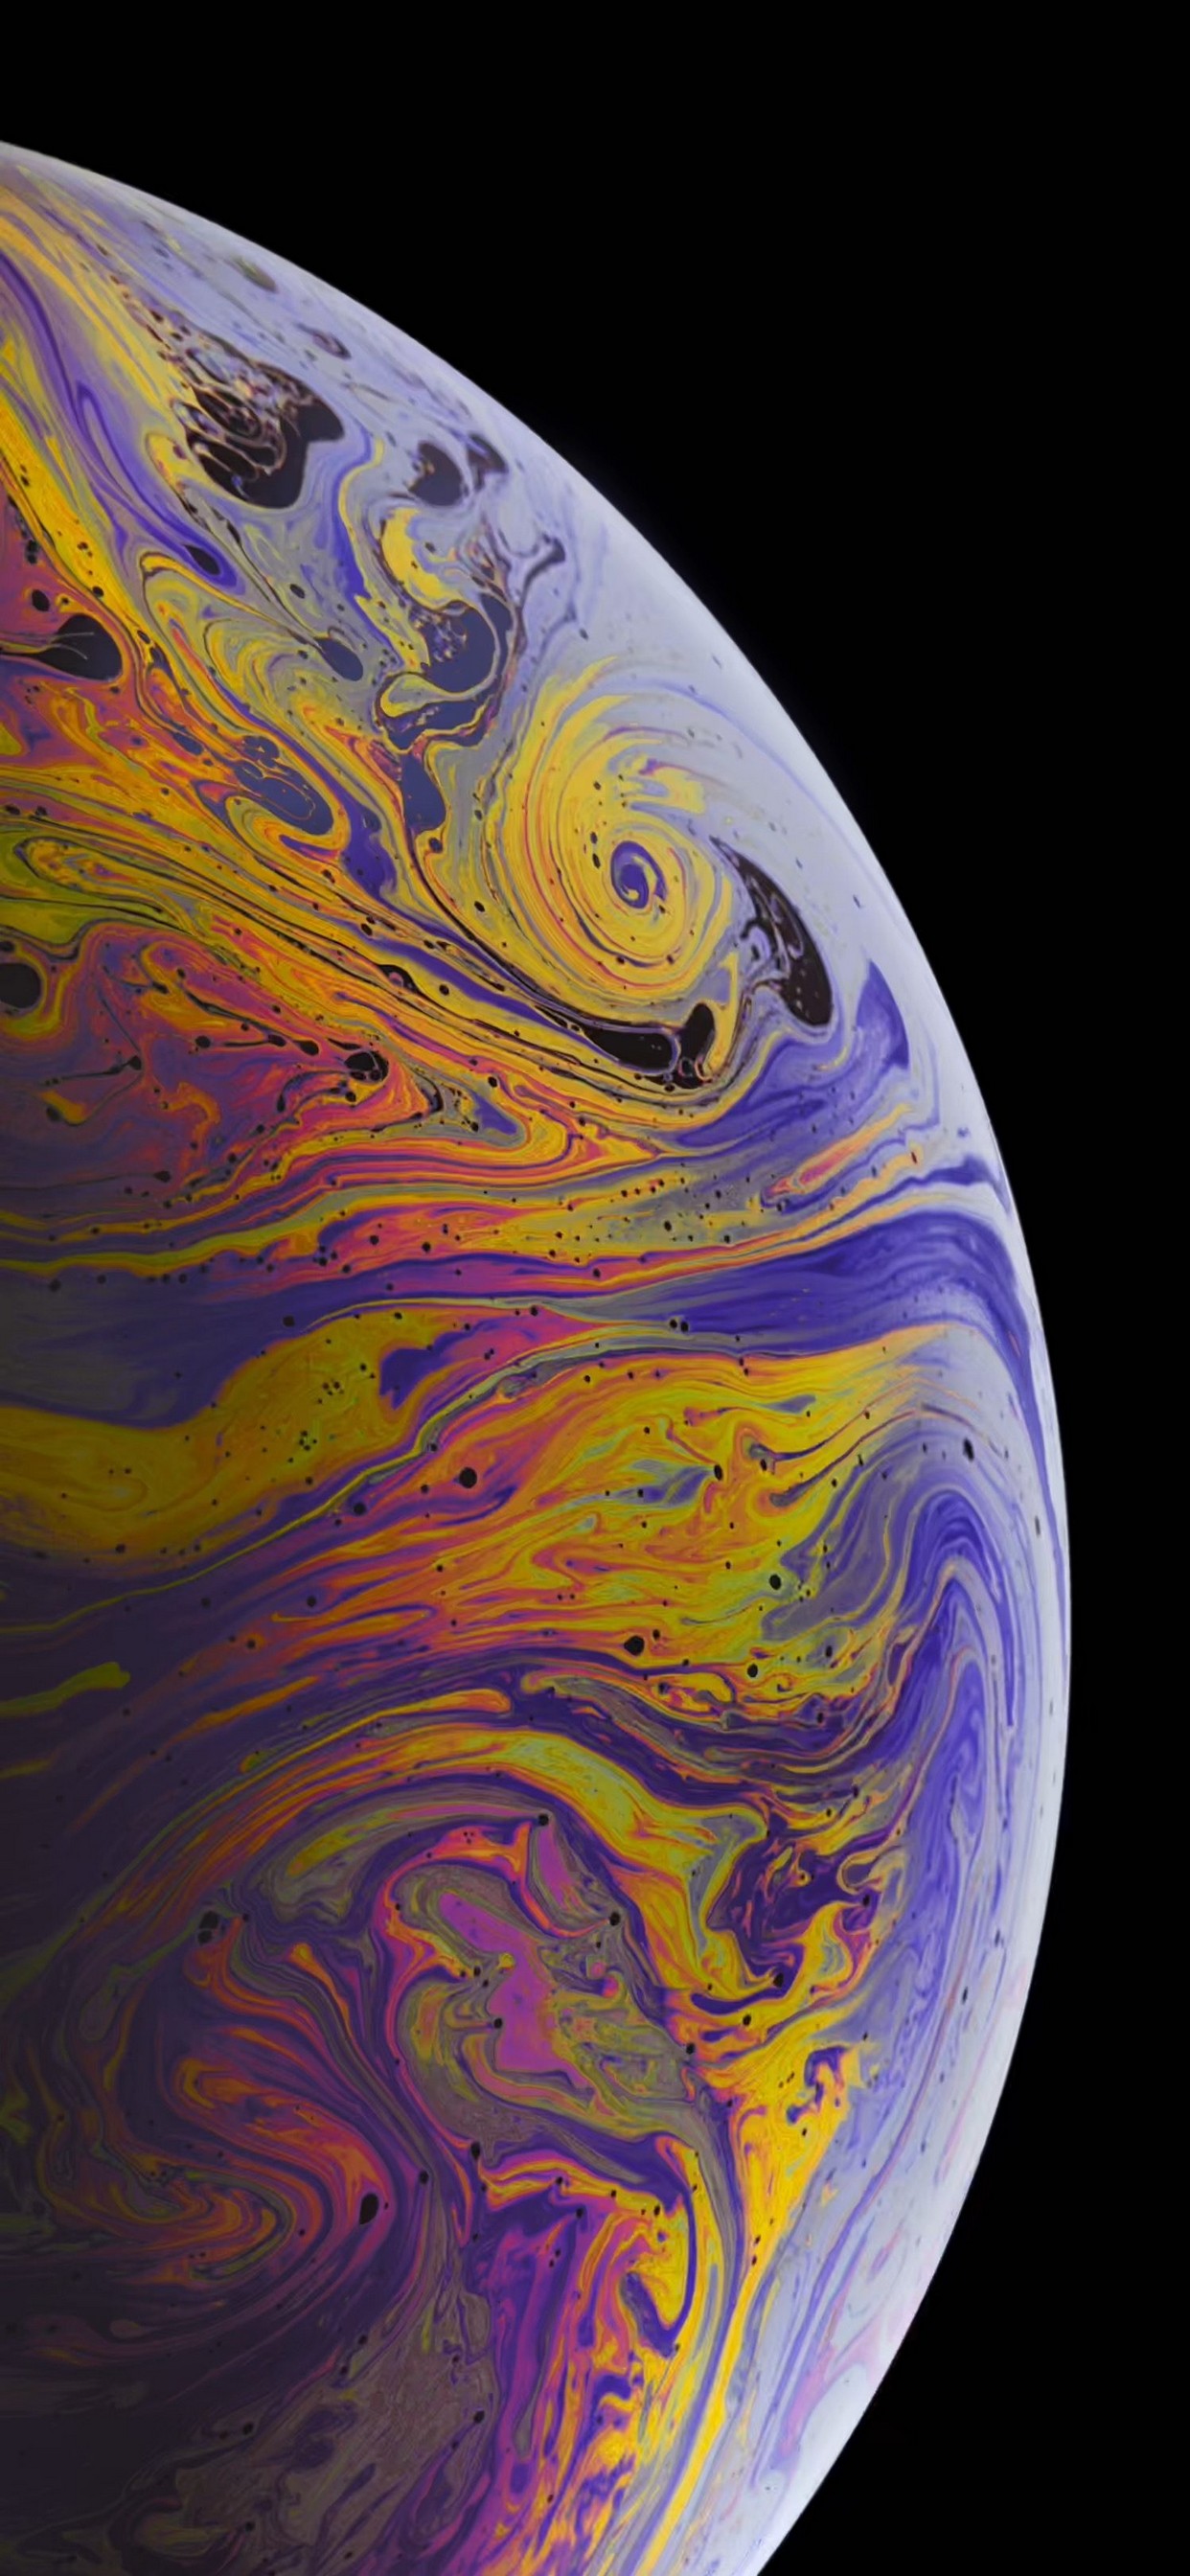 iPhone XS Max Wallpaper With high-resolution 1242X2688 pixel. You can set as wallpaper for Apple iPhone X, XS Max, XR, 8, 7, 6, SE, iPad. Enjoy and share your favorite HD wallpapers and background images